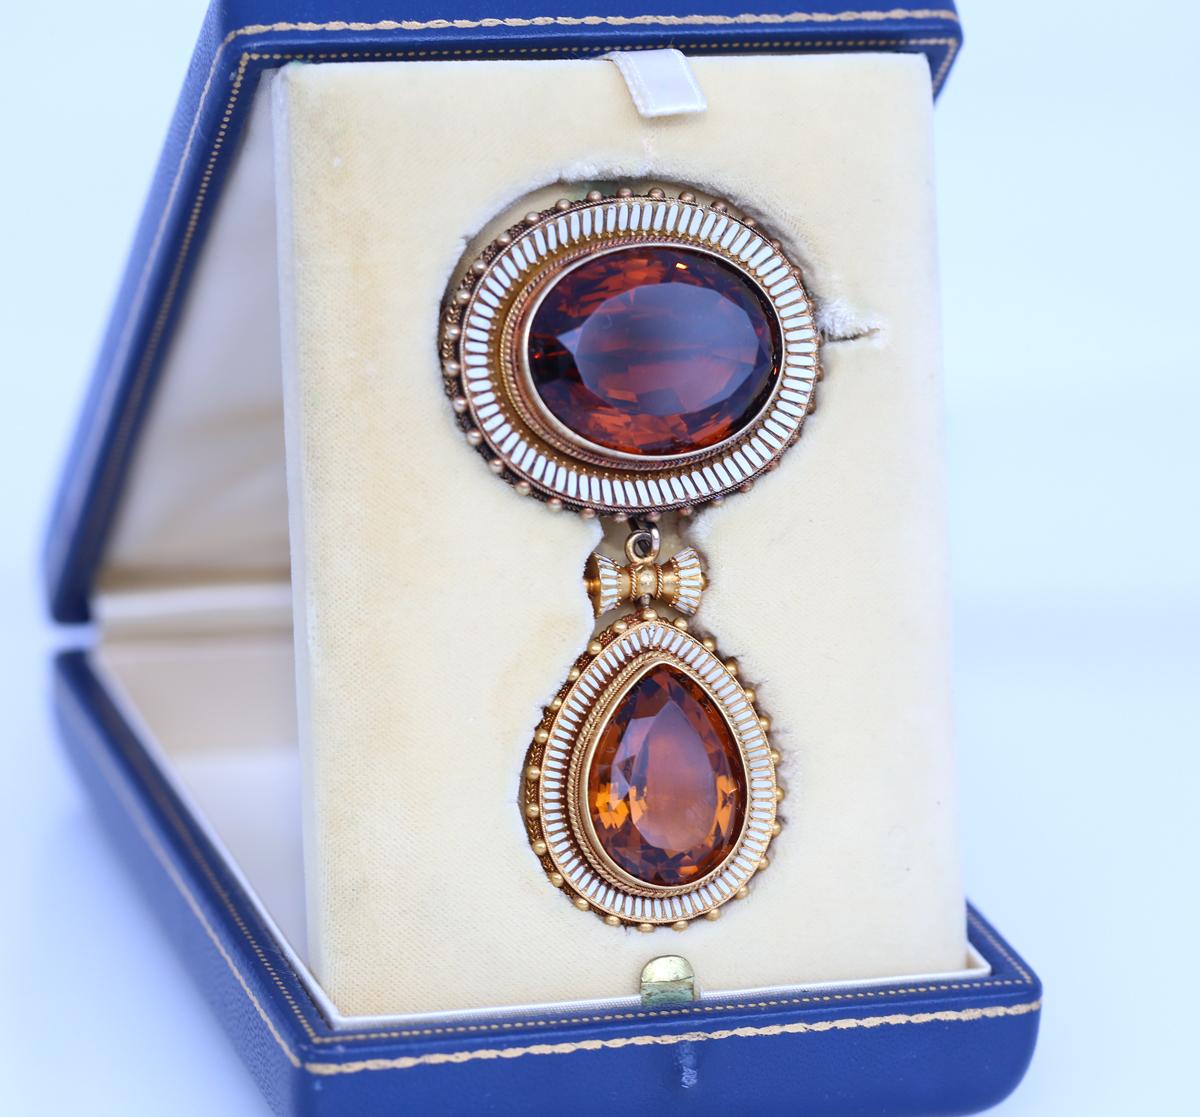 Massive Citrine and White Enamel brooch that is also a pendant. Transformable into two separate pendants. Amazing level of jeweler craftsmanship with finest detailing.  
The pendant/brooch is of the age where the components may be a combination of